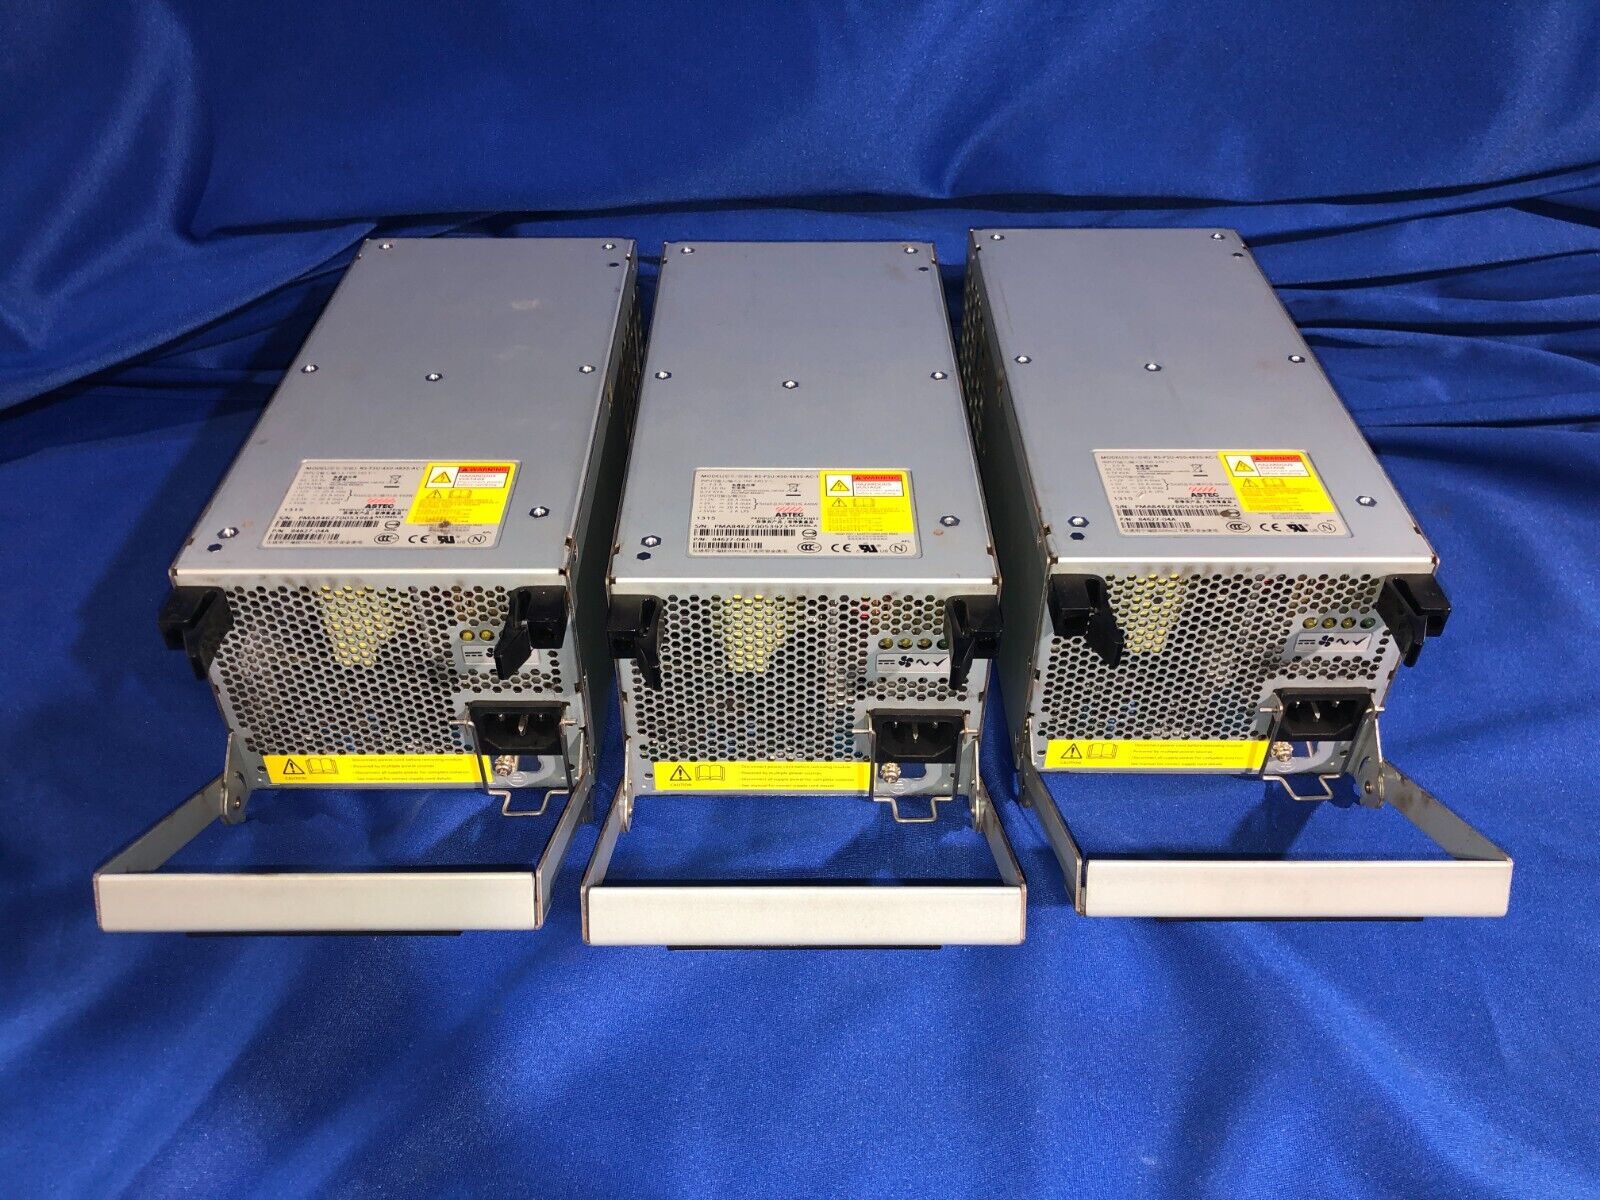 Lot: 3x ASTEC RS-PSU-450-4835-AC-1 Power Supply Dell EqualLogic PS6500 - Working